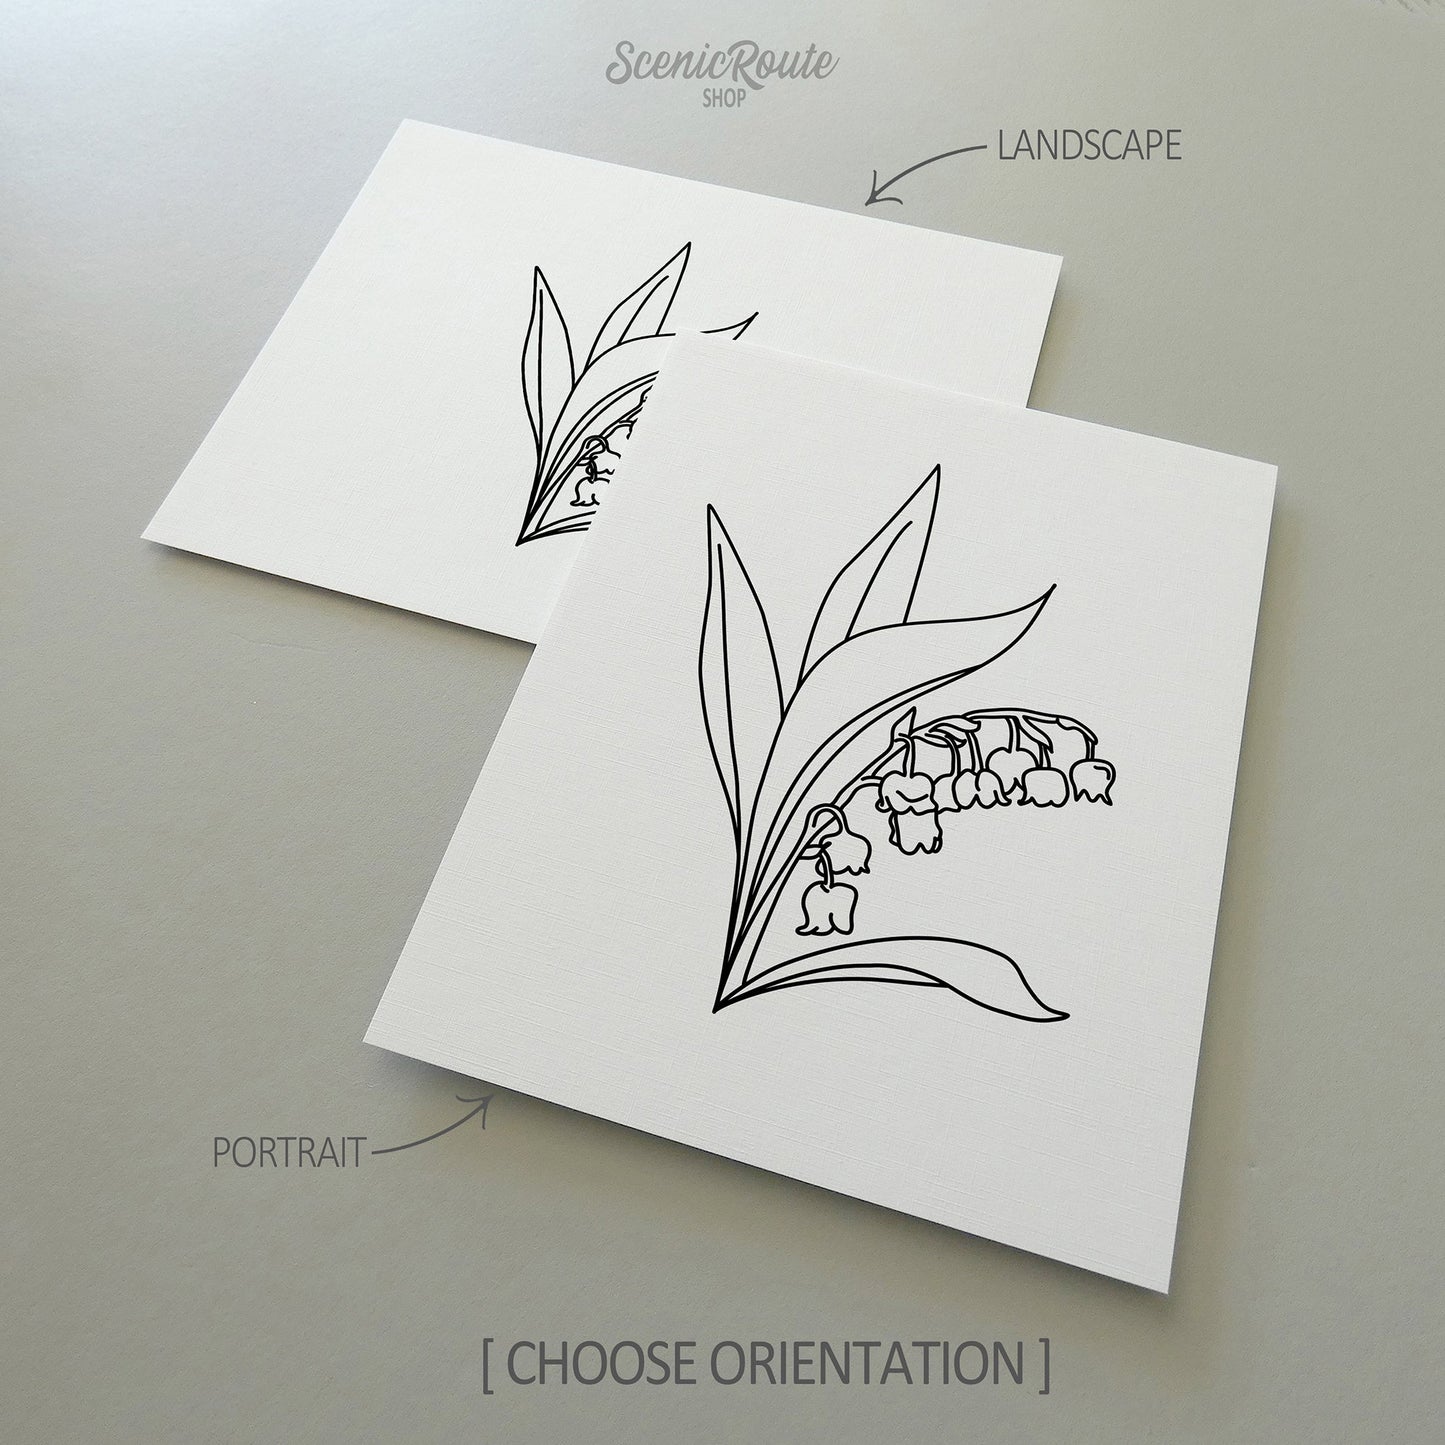 Two line art drawings of a Lily of the Valley Flower on white linen paper with a gray background.  The pieces are shown in portrait and landscape orientation for the available art print options.